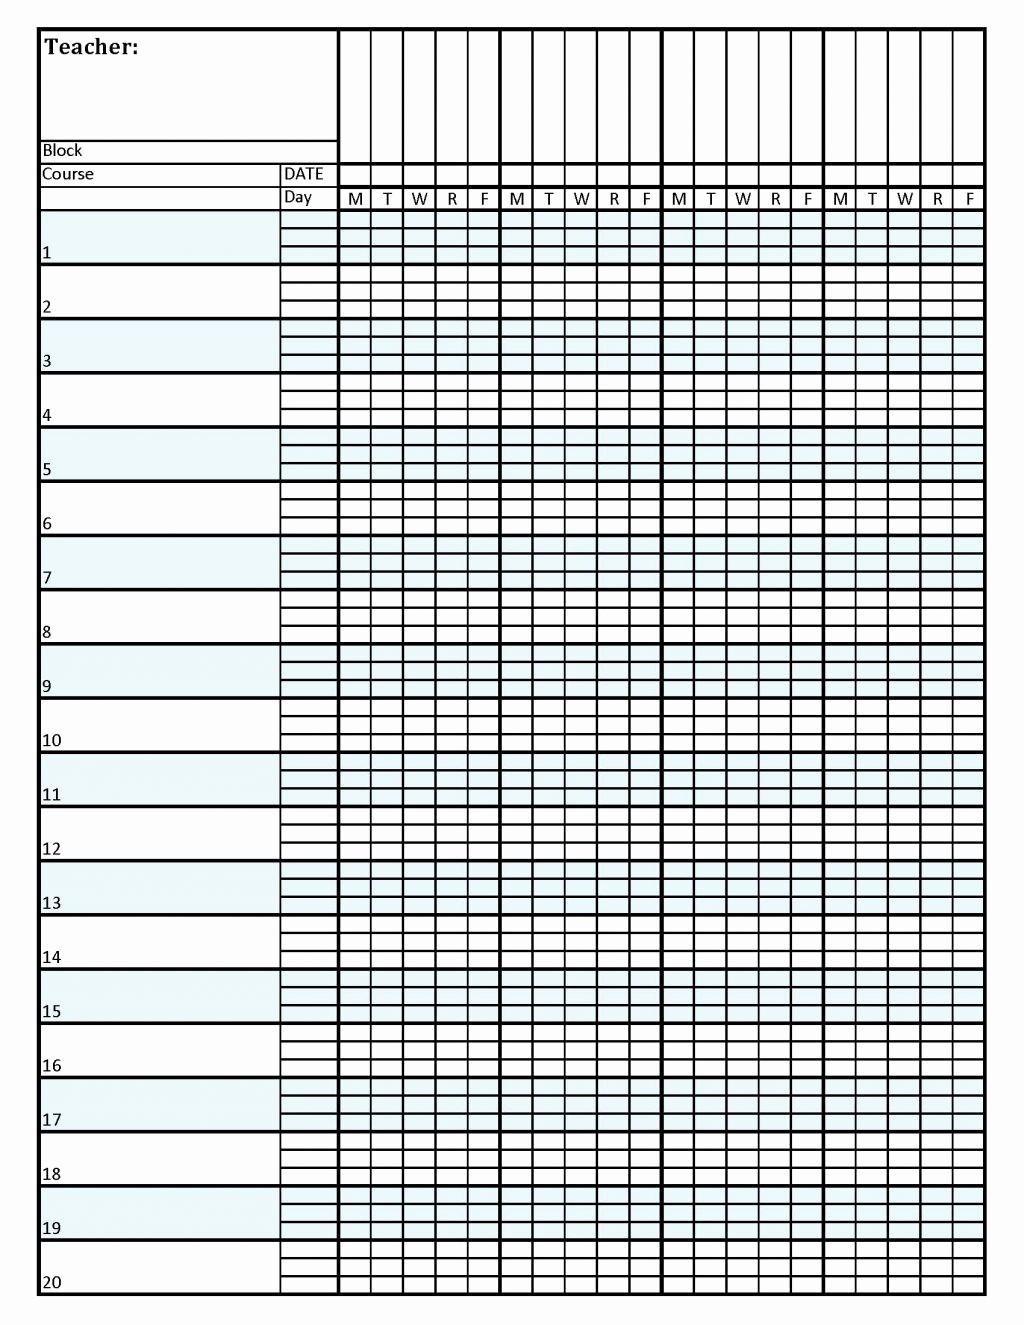 Weighted Grade Calculator Excel Template Lovely Grade Sheet Template for Students Pdf Deped Grading Excel